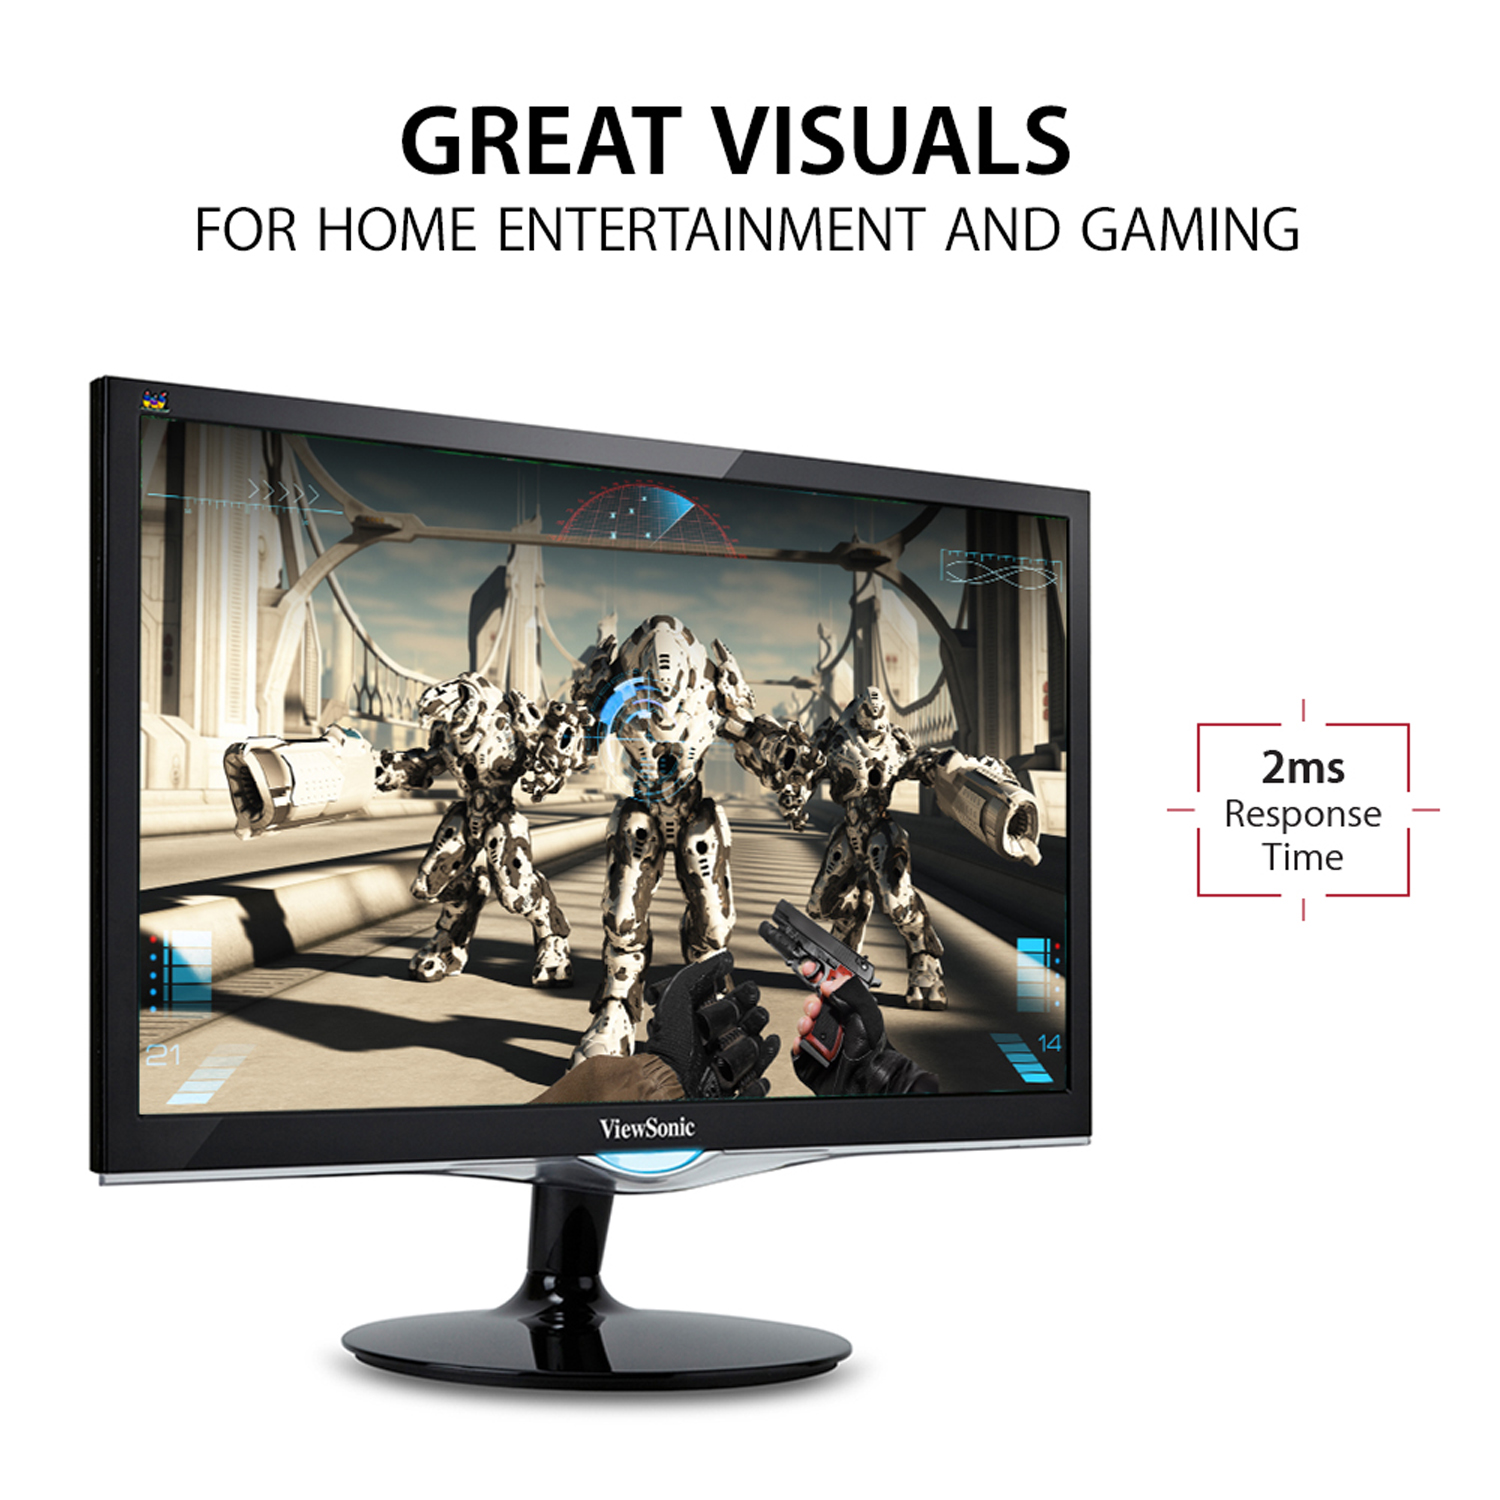 ViewSonic VX2452MH 24 Inch 2ms 60Hz 1080p Gaming Monitor with HDMI DVI and VGA inputs - image 3 of 7